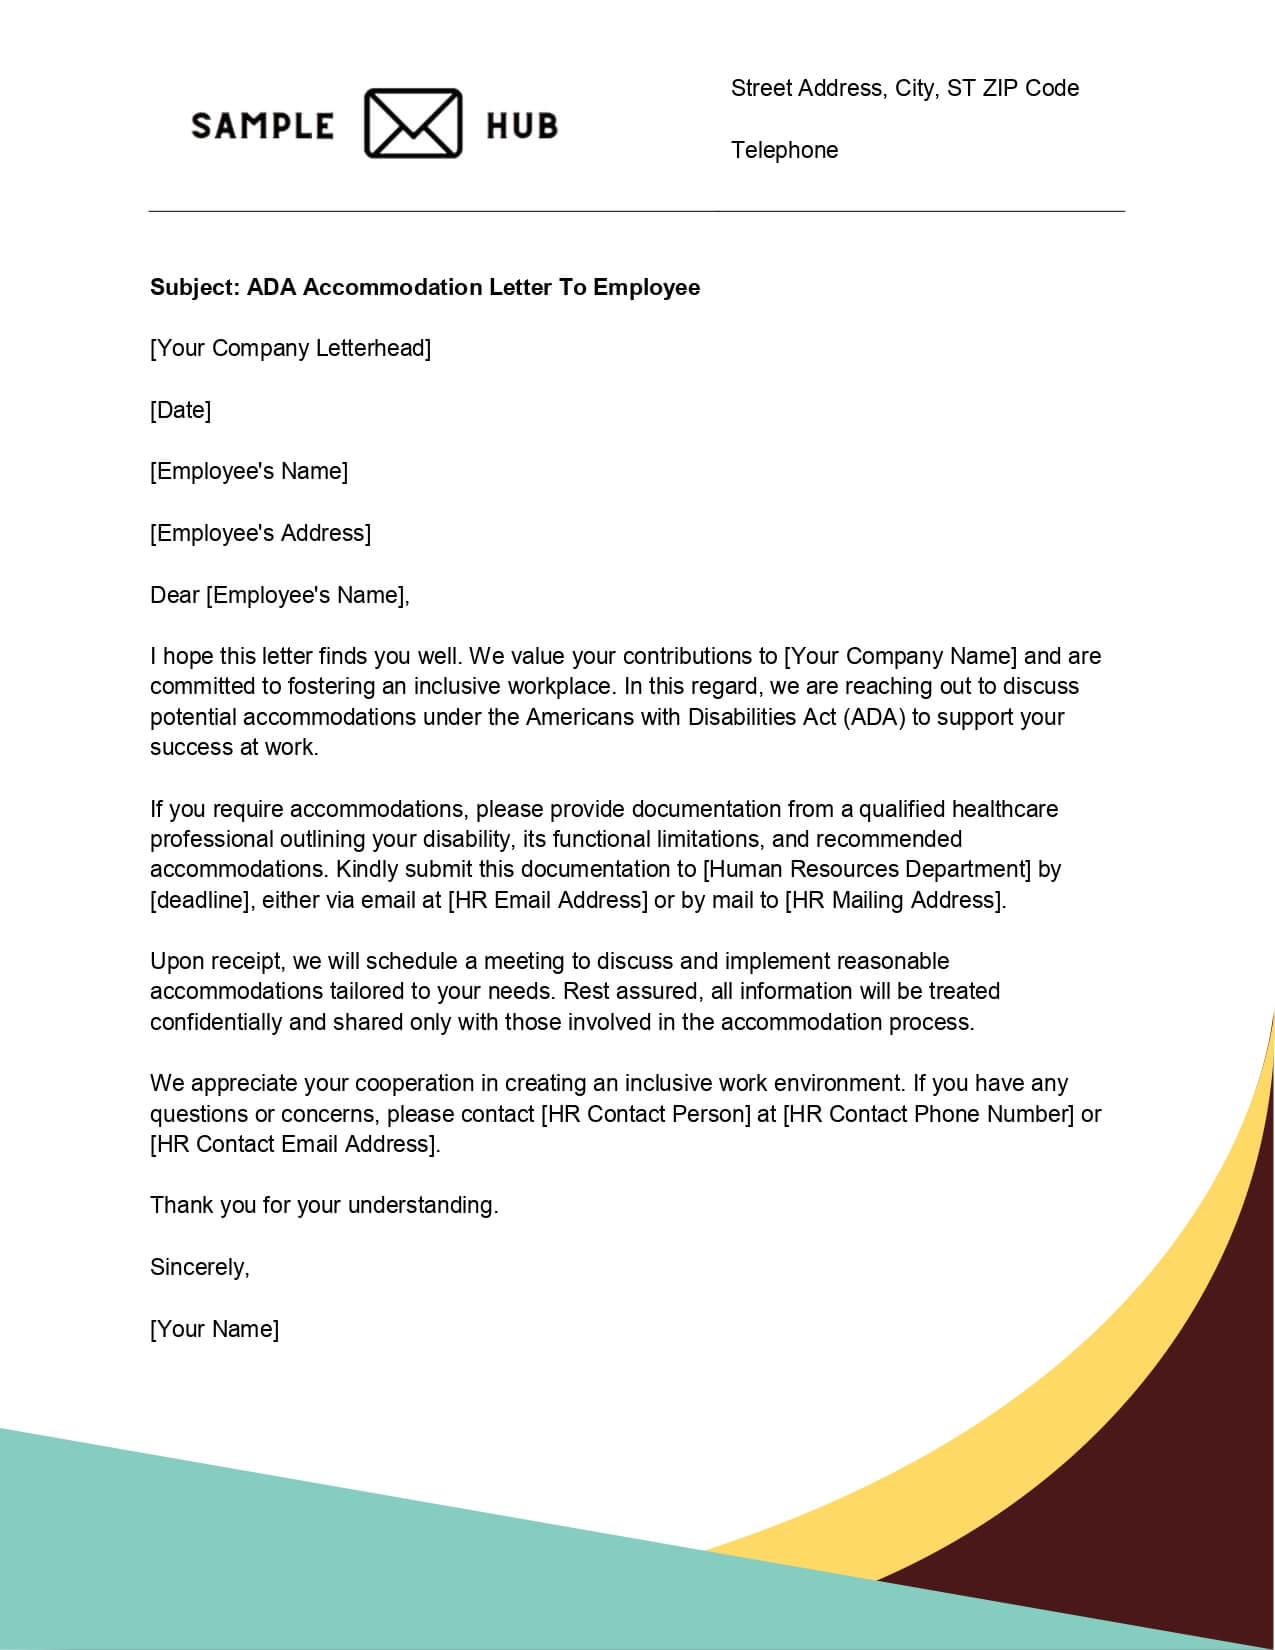 ADA Accommodation Letter To Employee